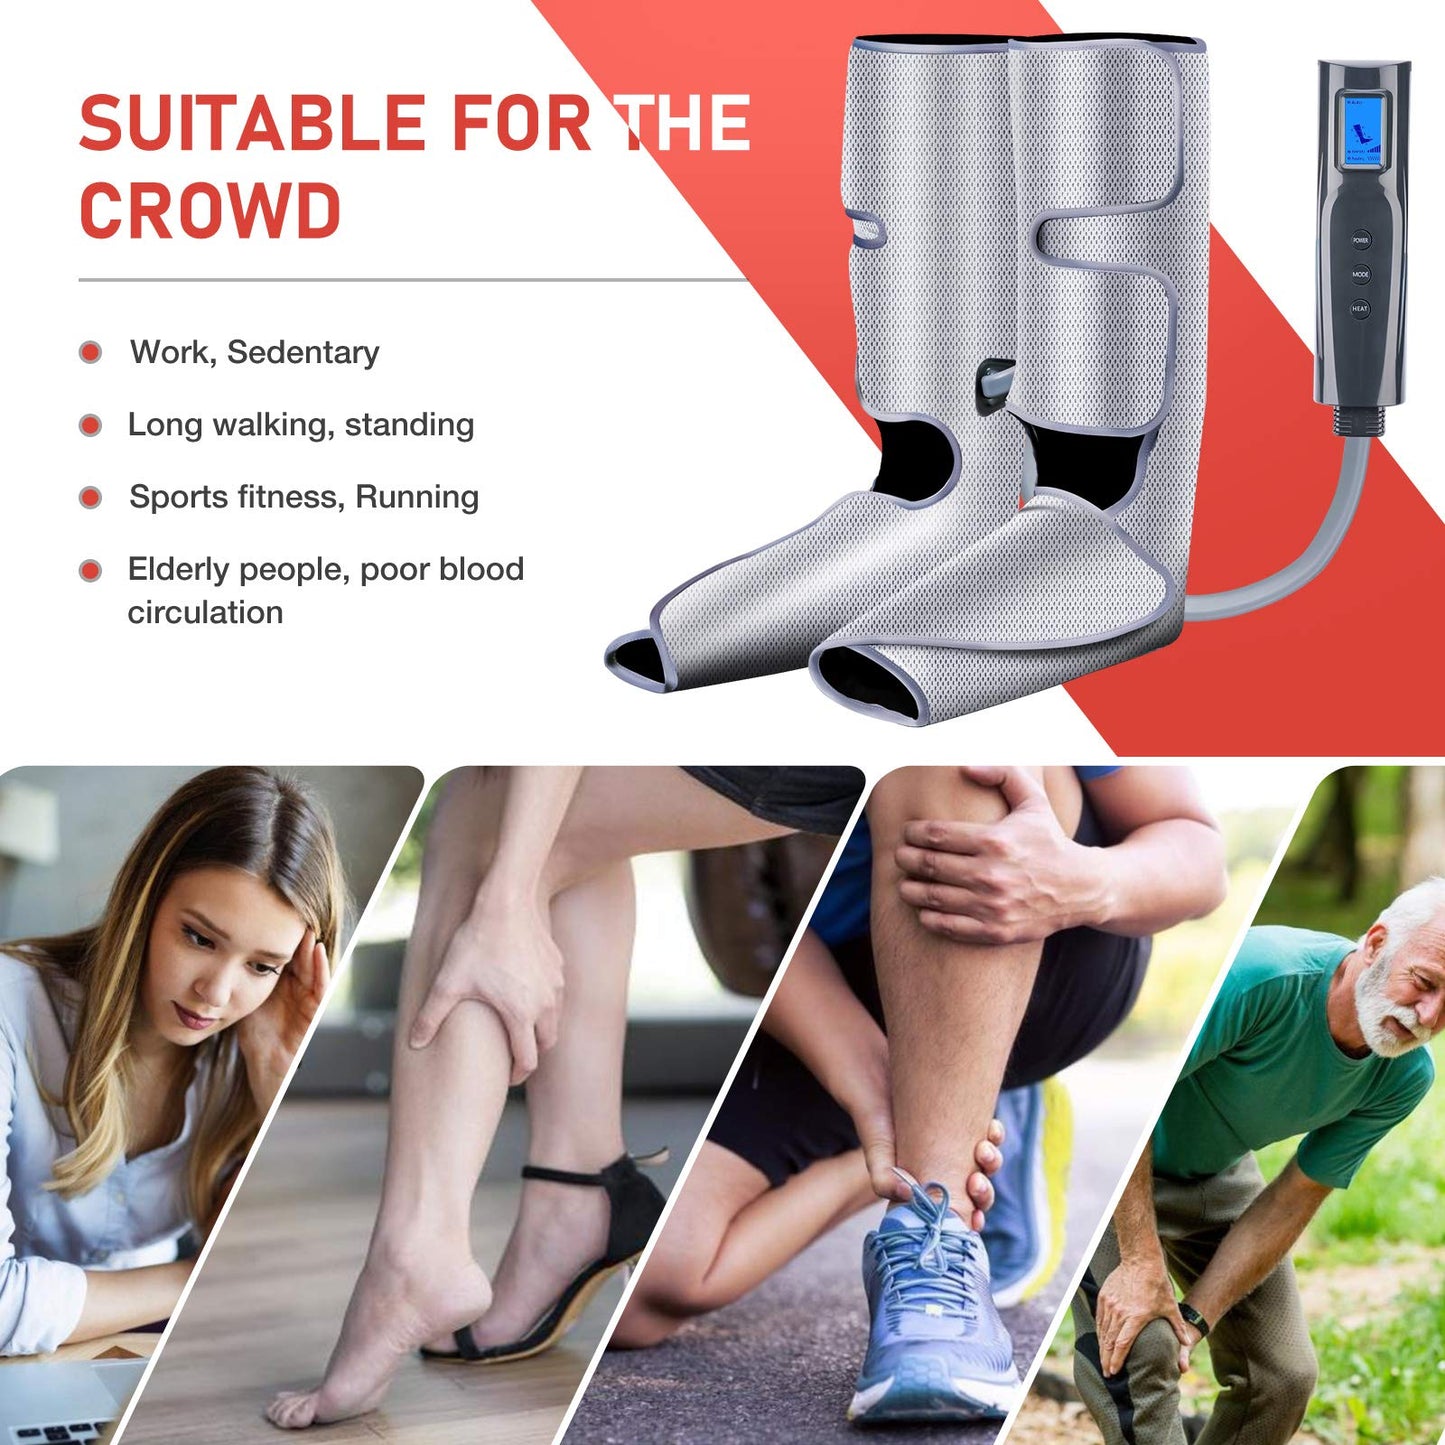 Fathers Day Gifts, Foot and Leg Massager with Heat, Air Leg Compression Massager for Circulation and Restless Legs Syndrome Relief,Foot and Calf Massager with 6 Modes